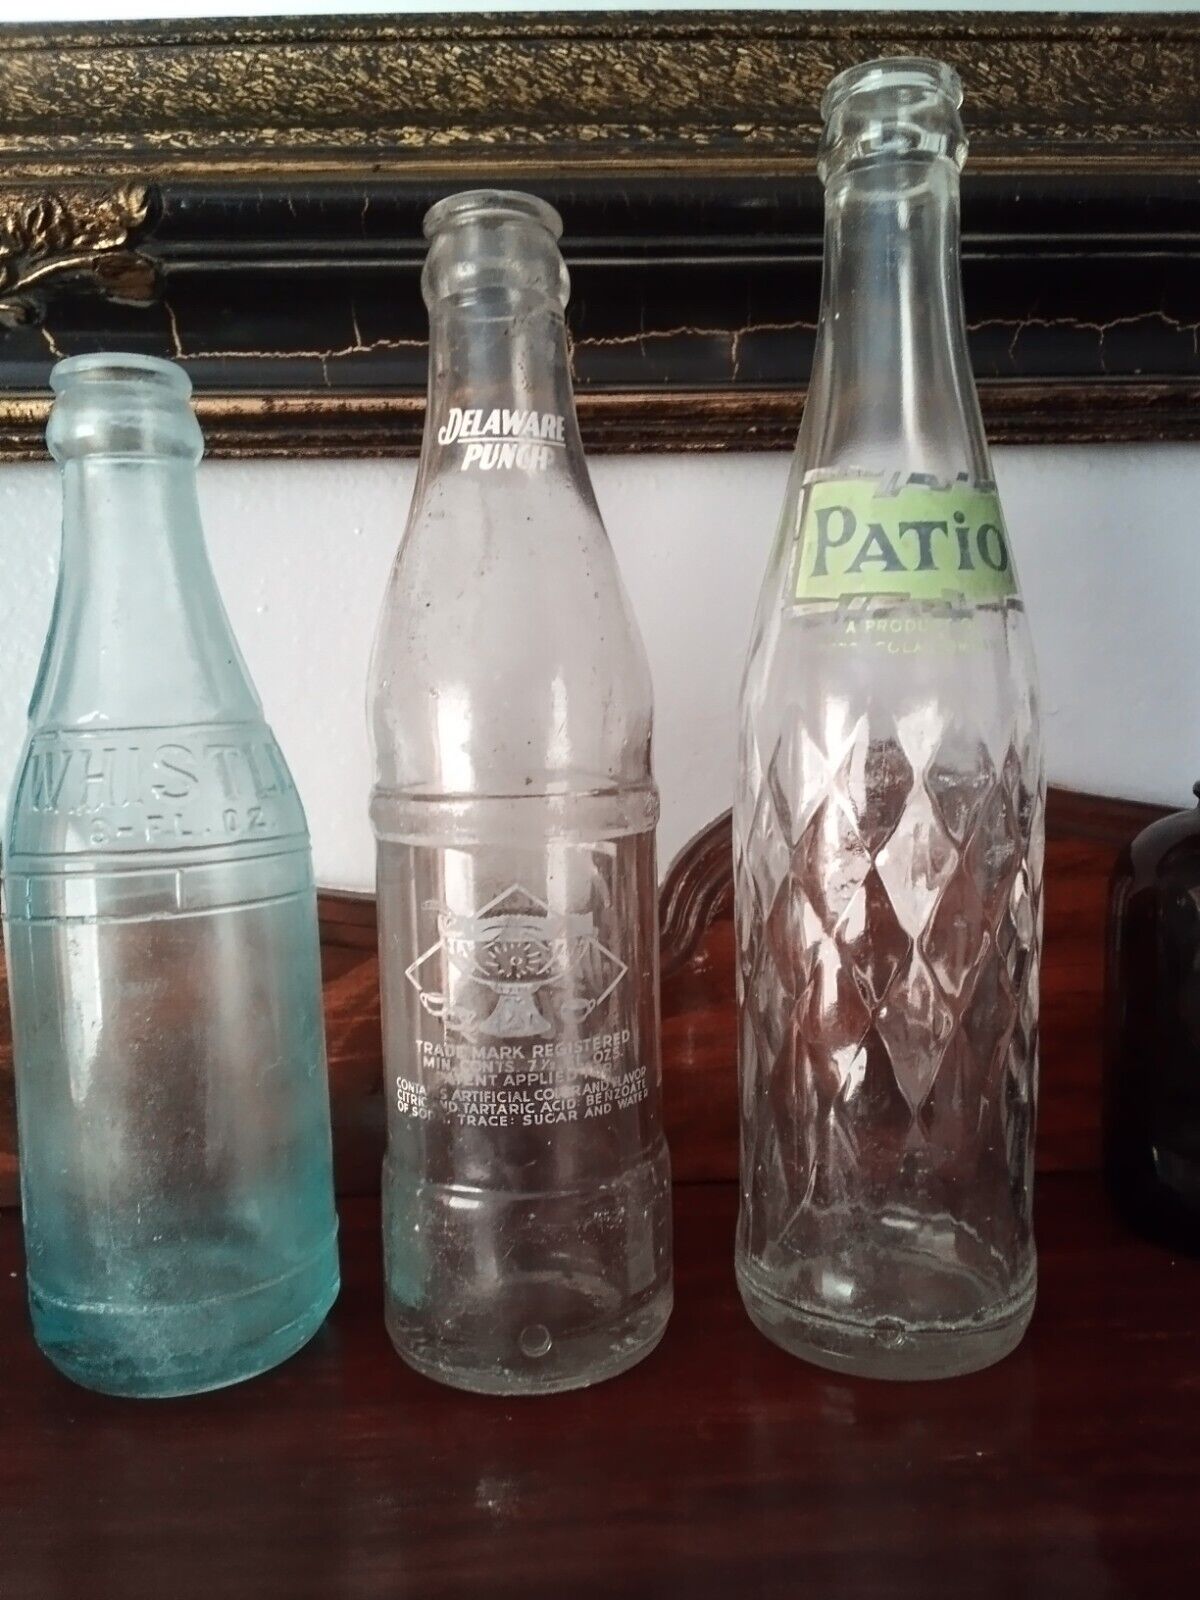 LOT OF 3 VINTAGE SODA BOTTLES: WHISTLE,DELAWARE PUNCH & PATIO (PEPSI PRODUCT)